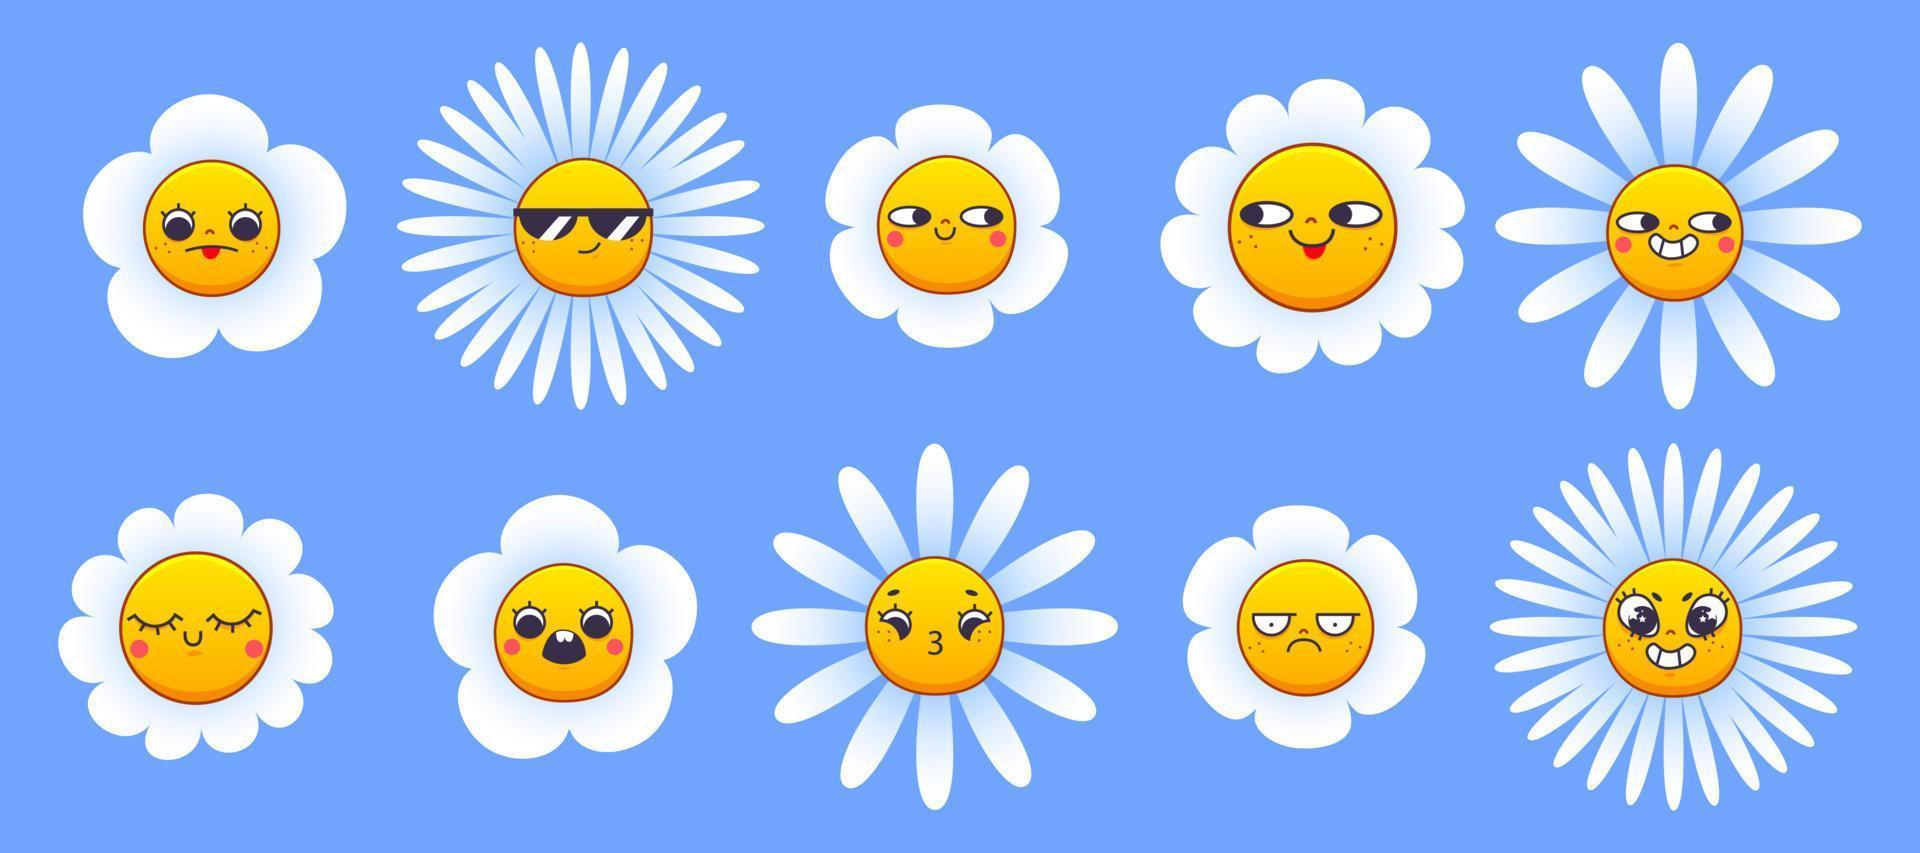 Chamomile flower character cute face vector icon